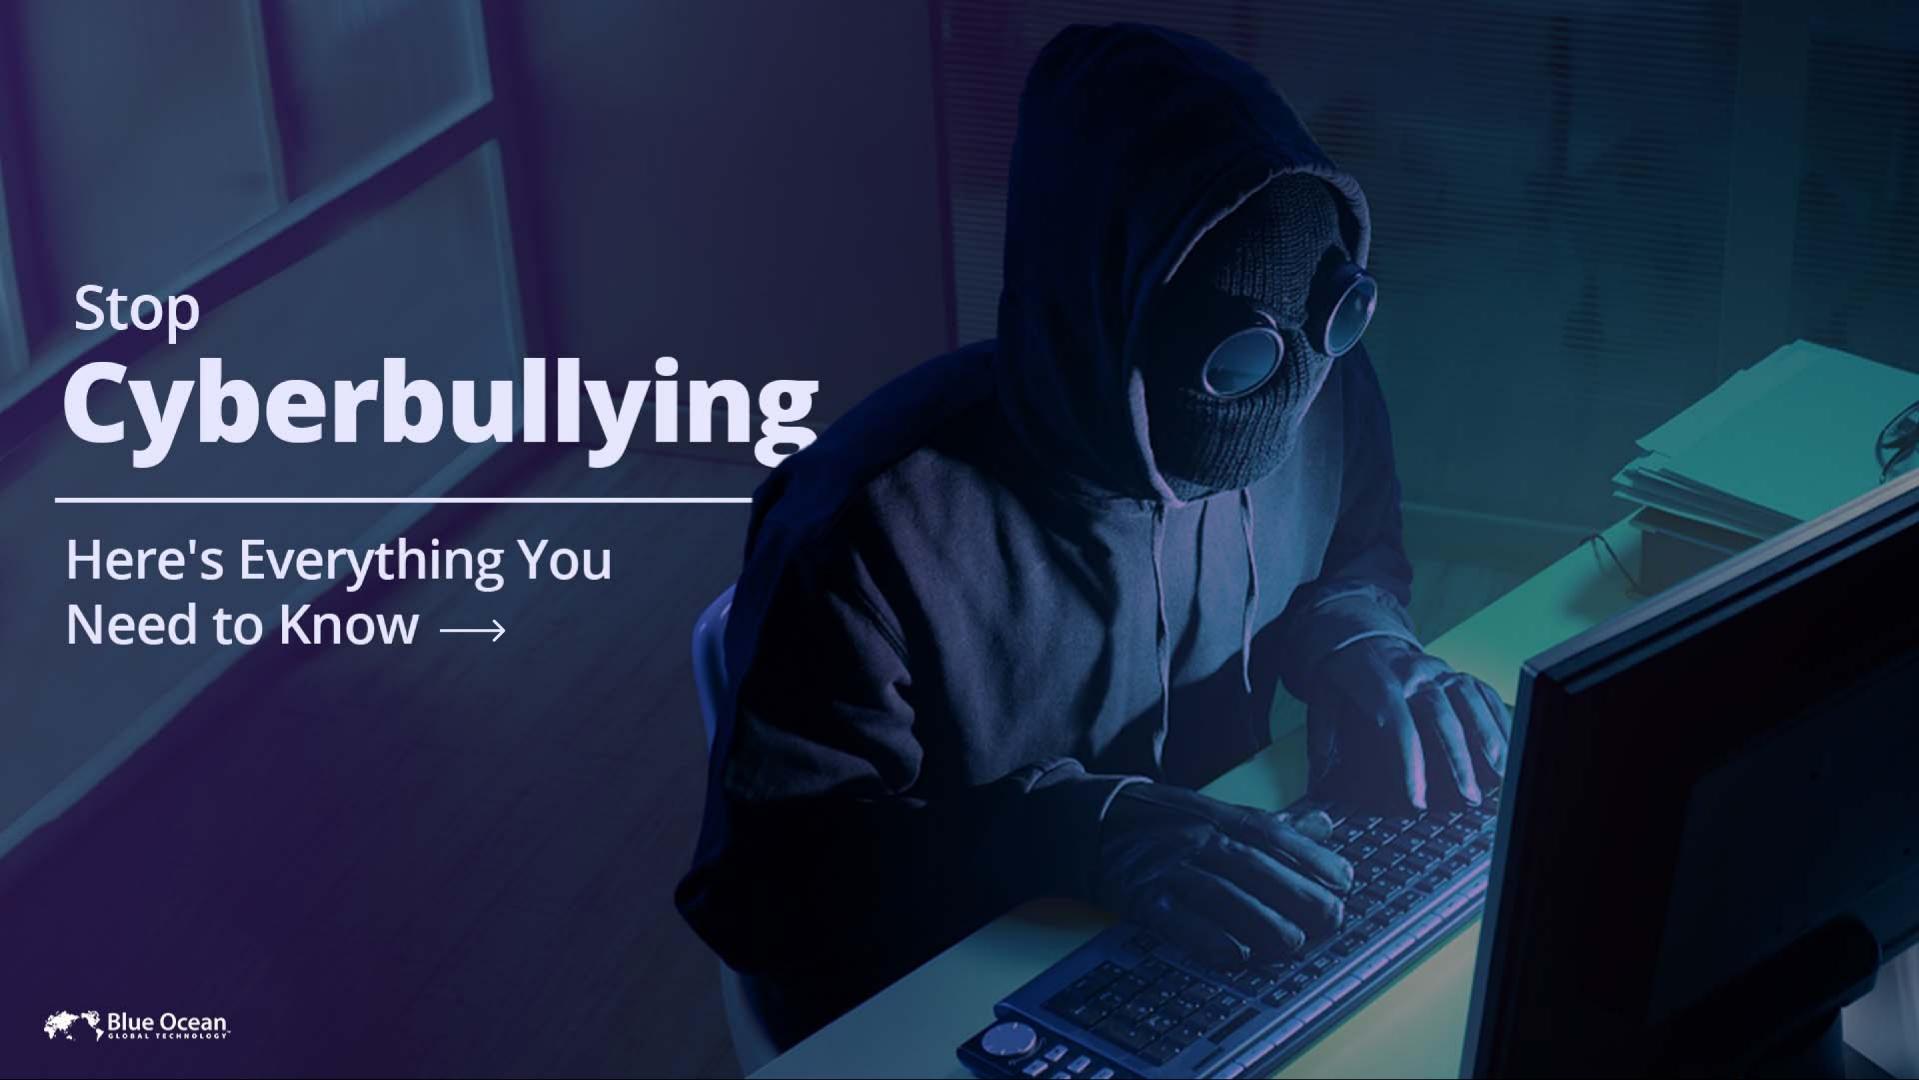 Stop Cyberbullying: Here's Everything You Need to Know